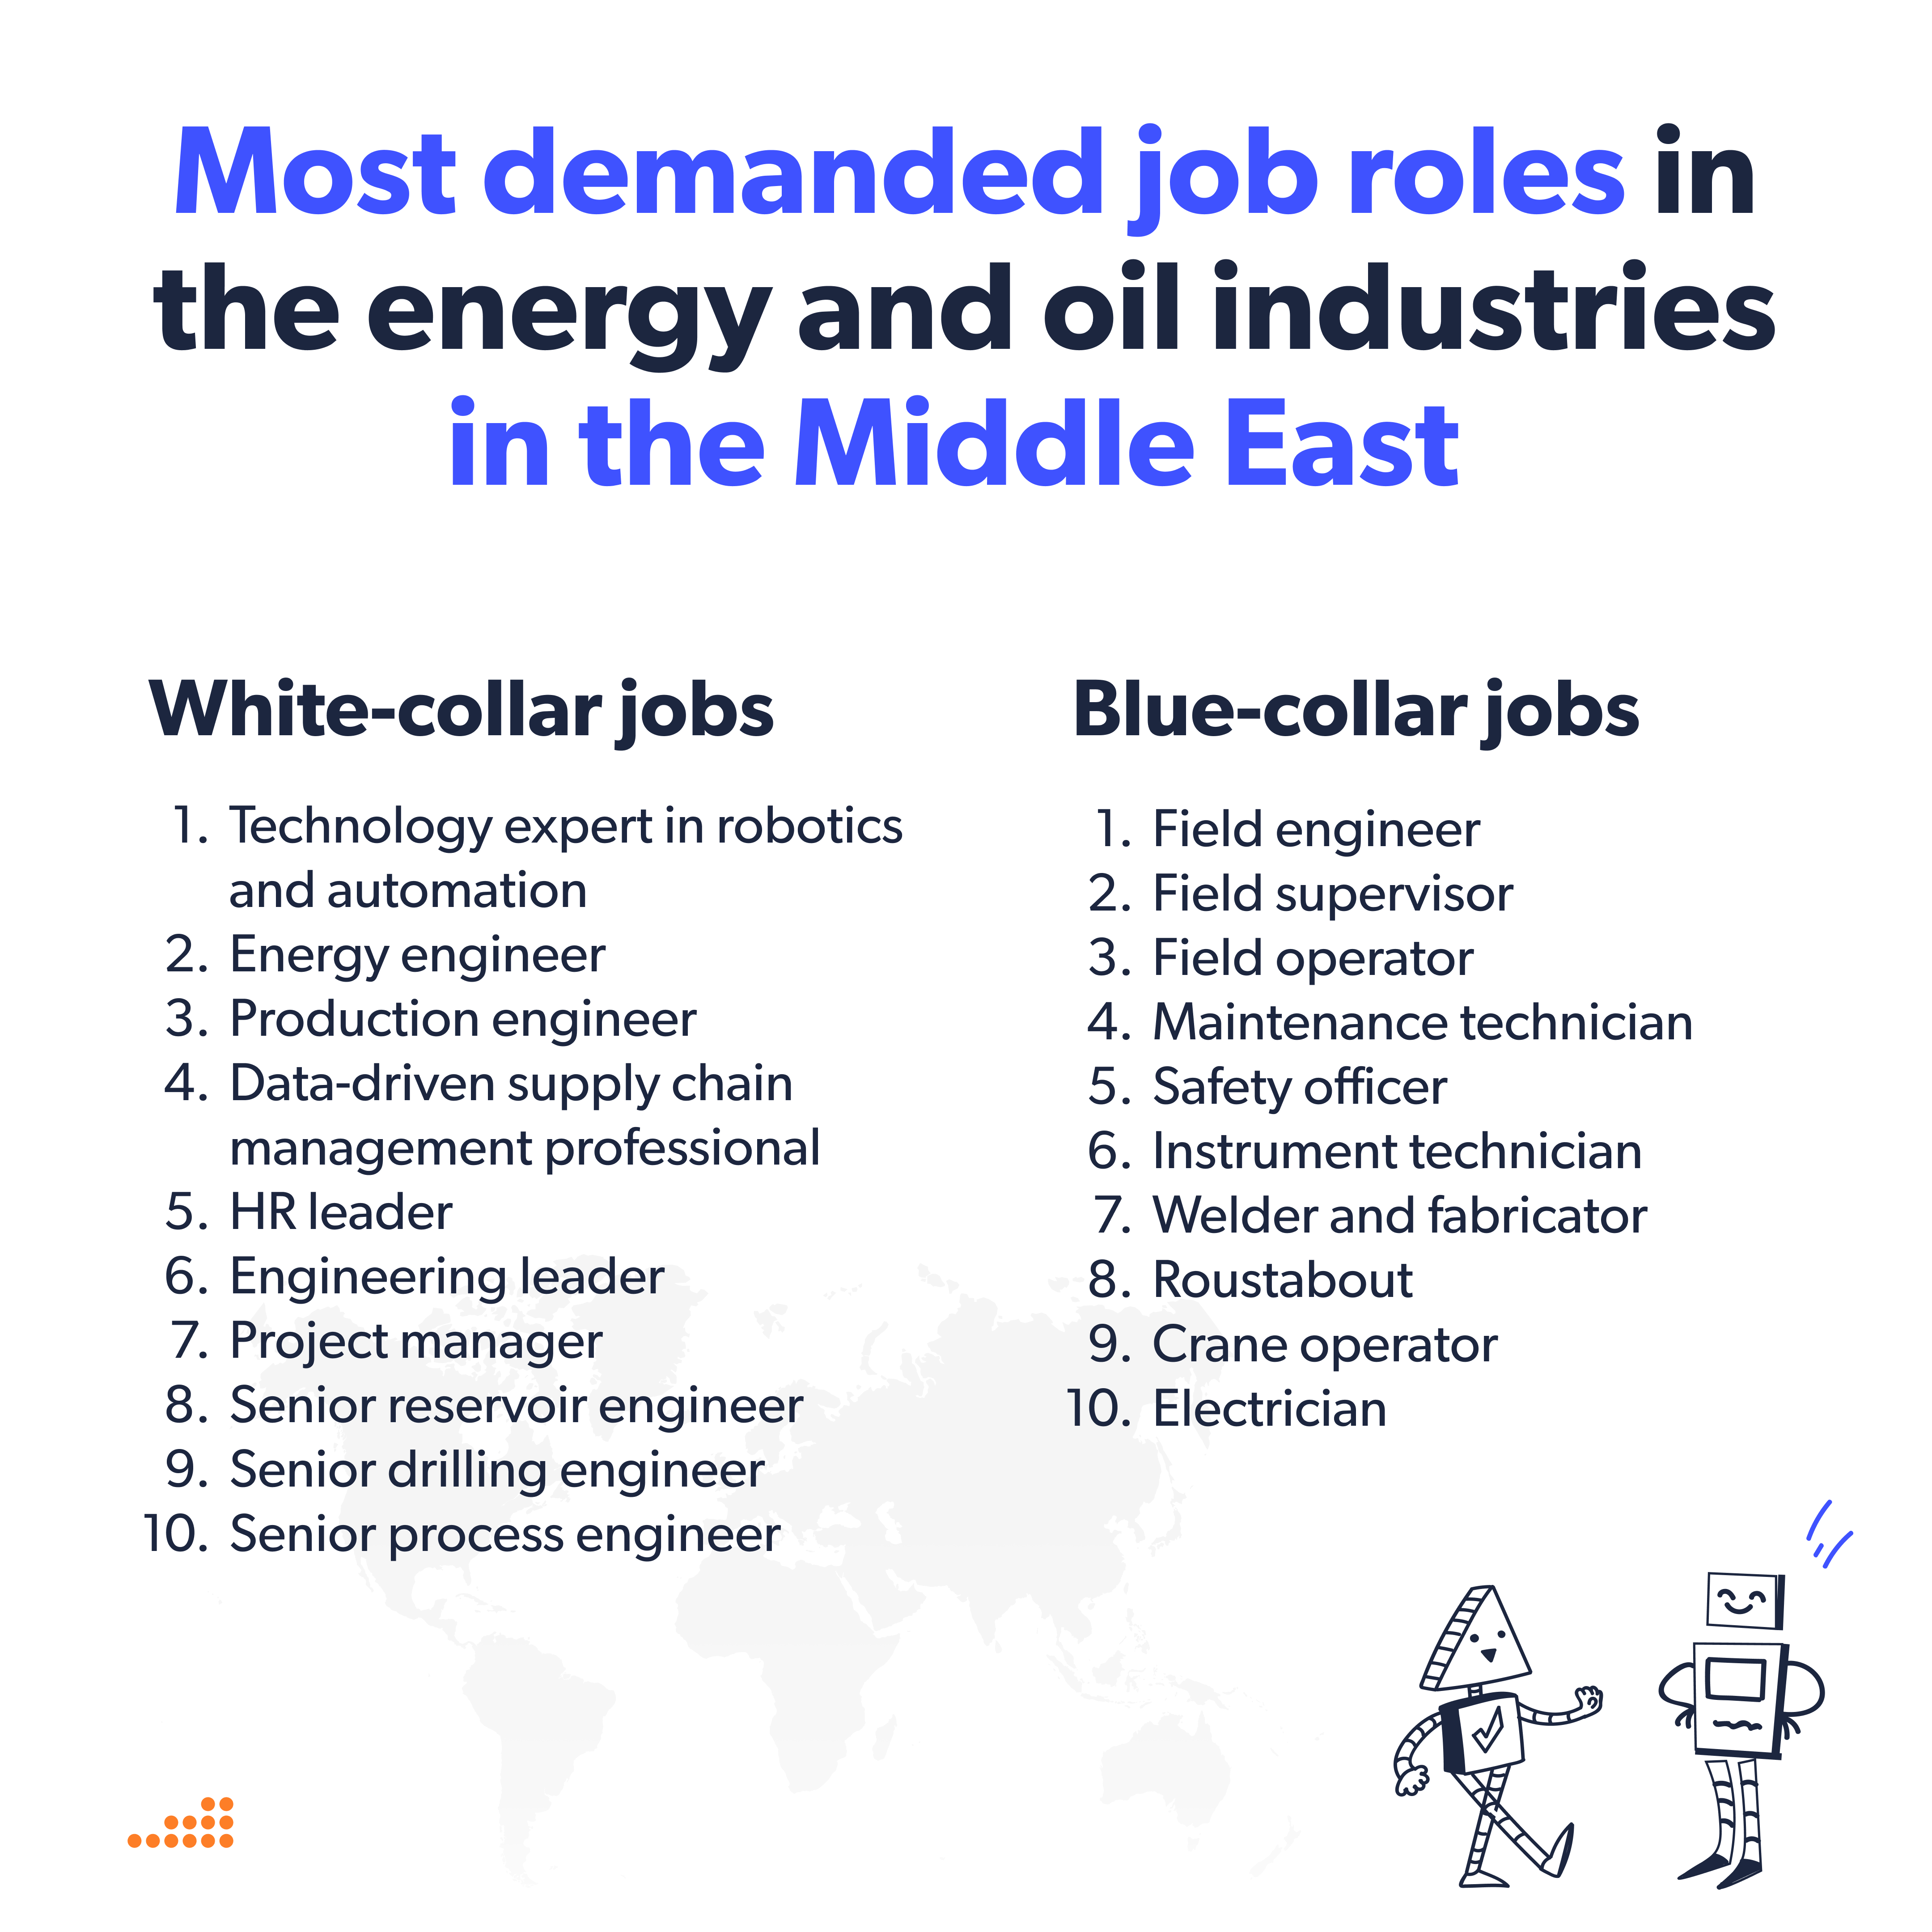 Most demanded job roles in the energy and oil industries in the Middle East